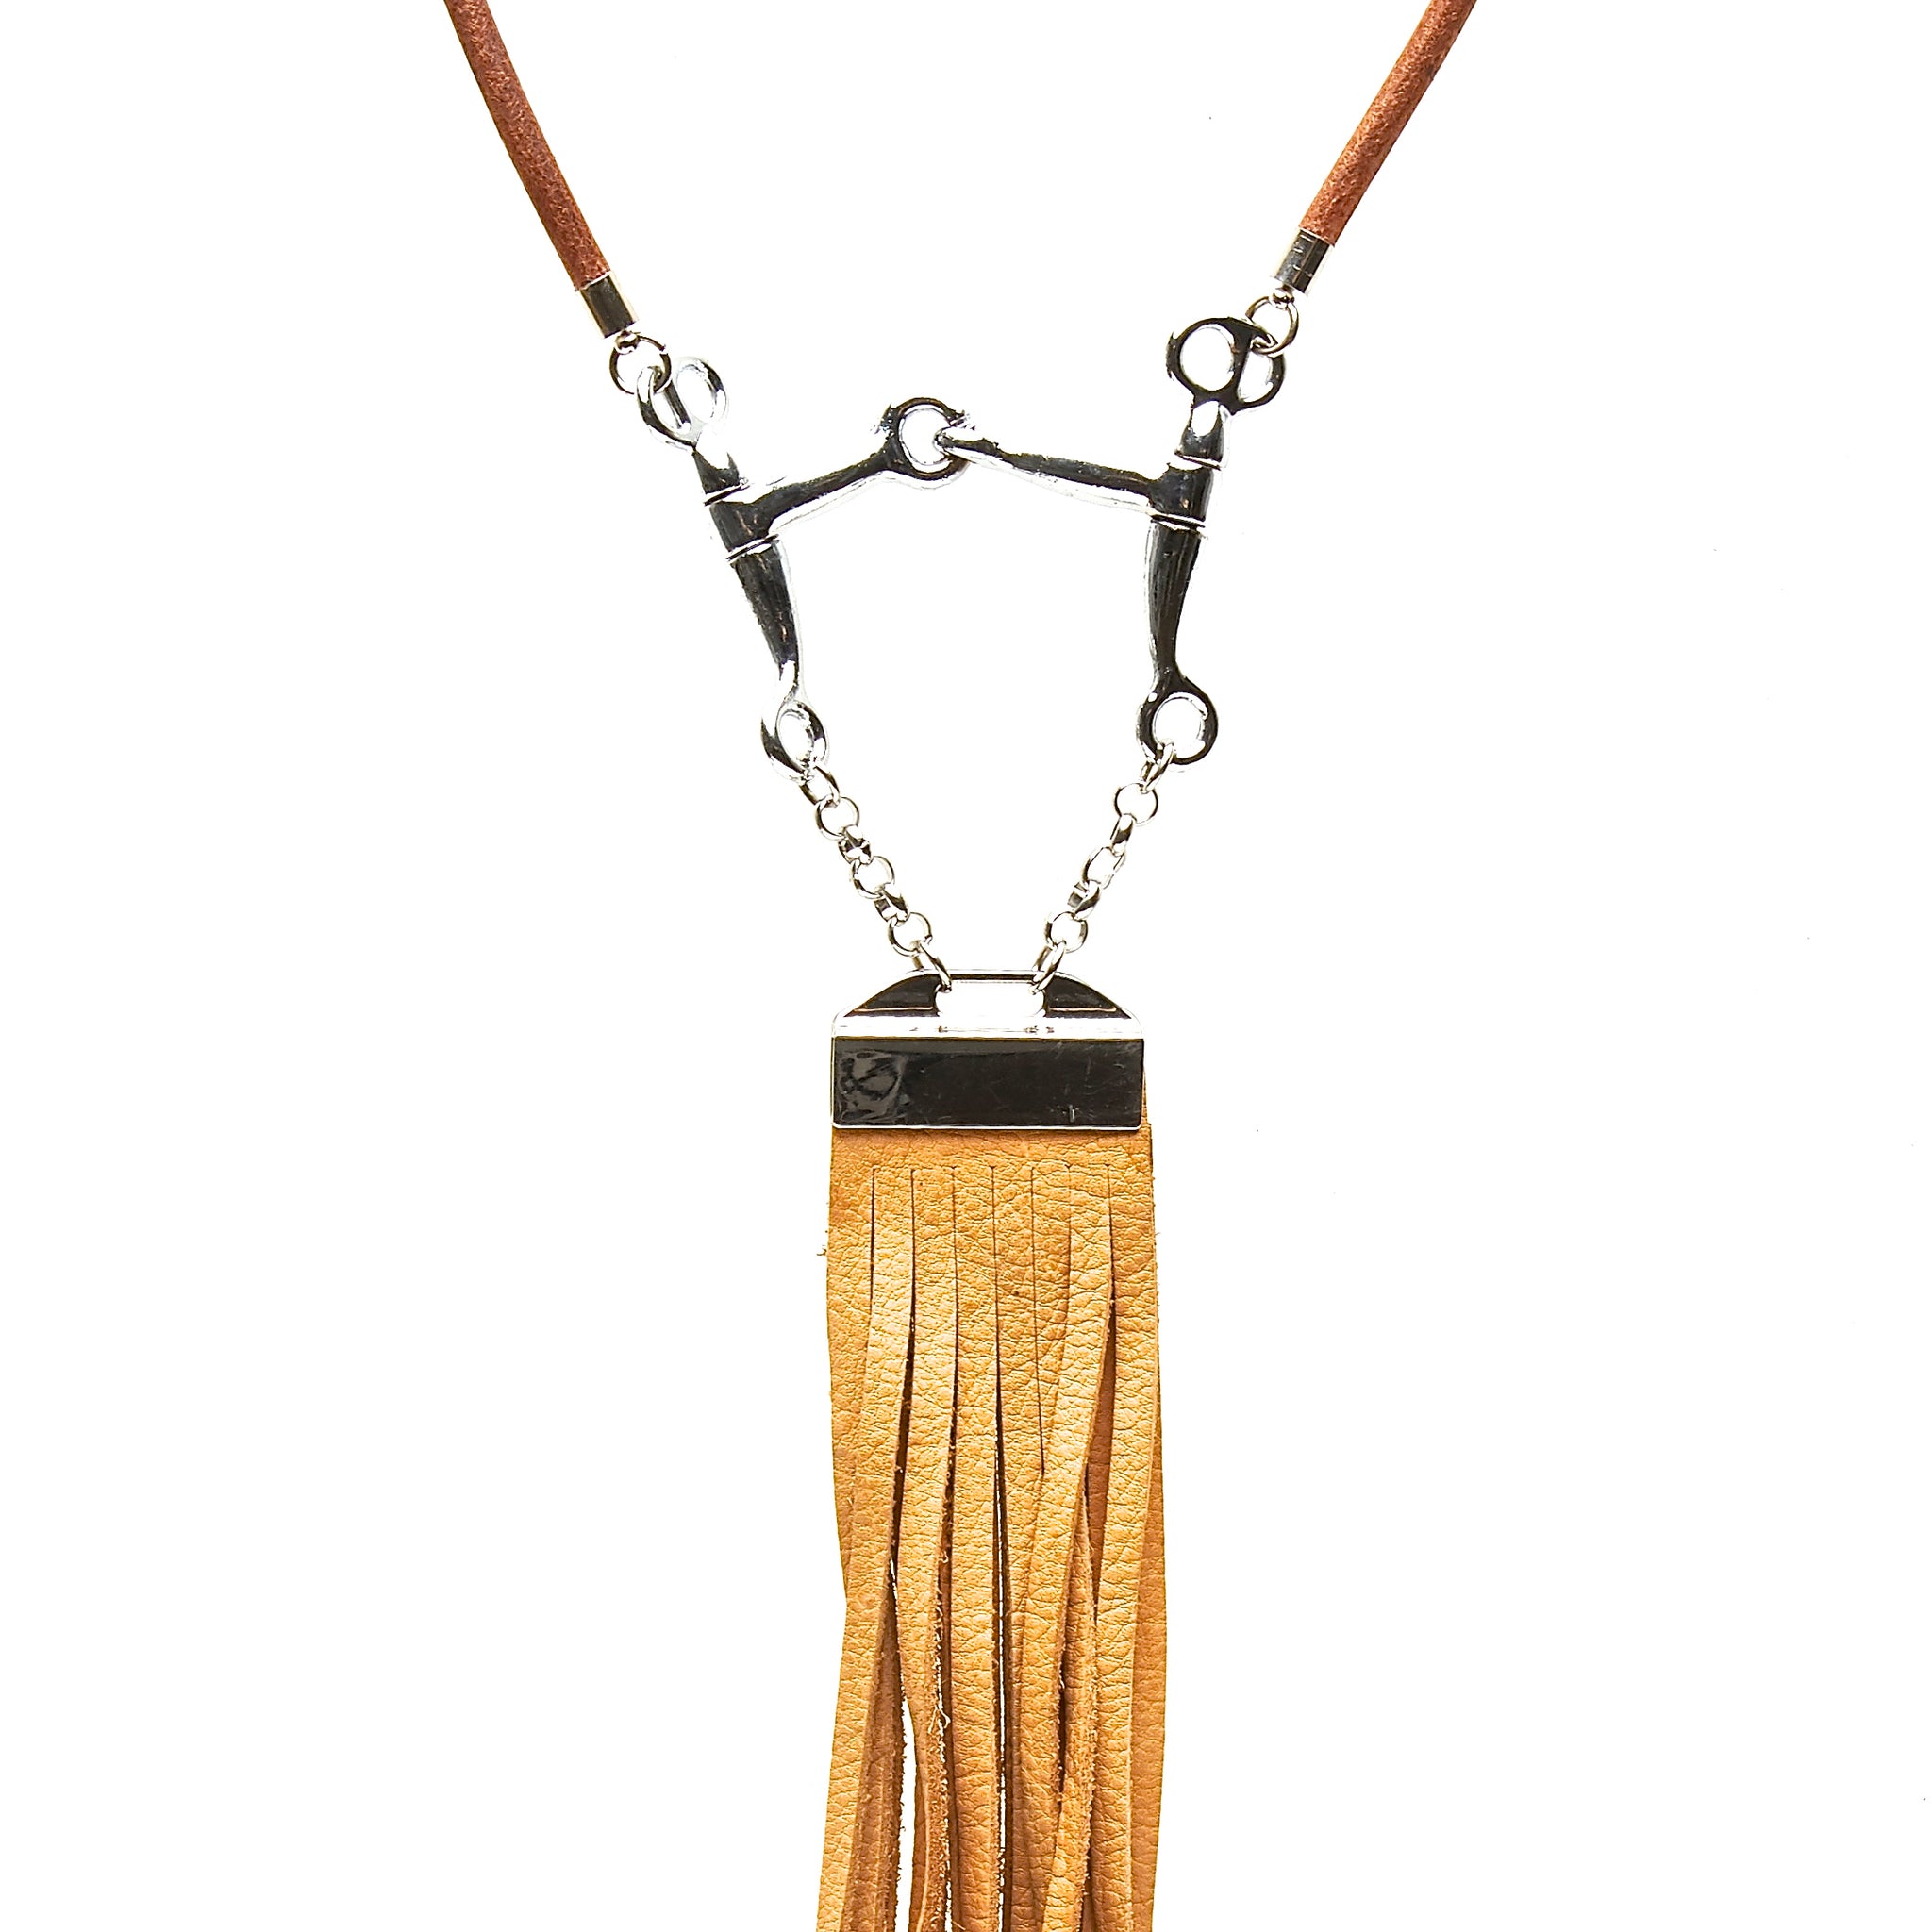 TAN LEATHER CHOKER NECKLACE WITH PELHAM HORSE BIT PENDANT AND LONG DEERSKIN LEATHER FRINGE by nyet jewelry.